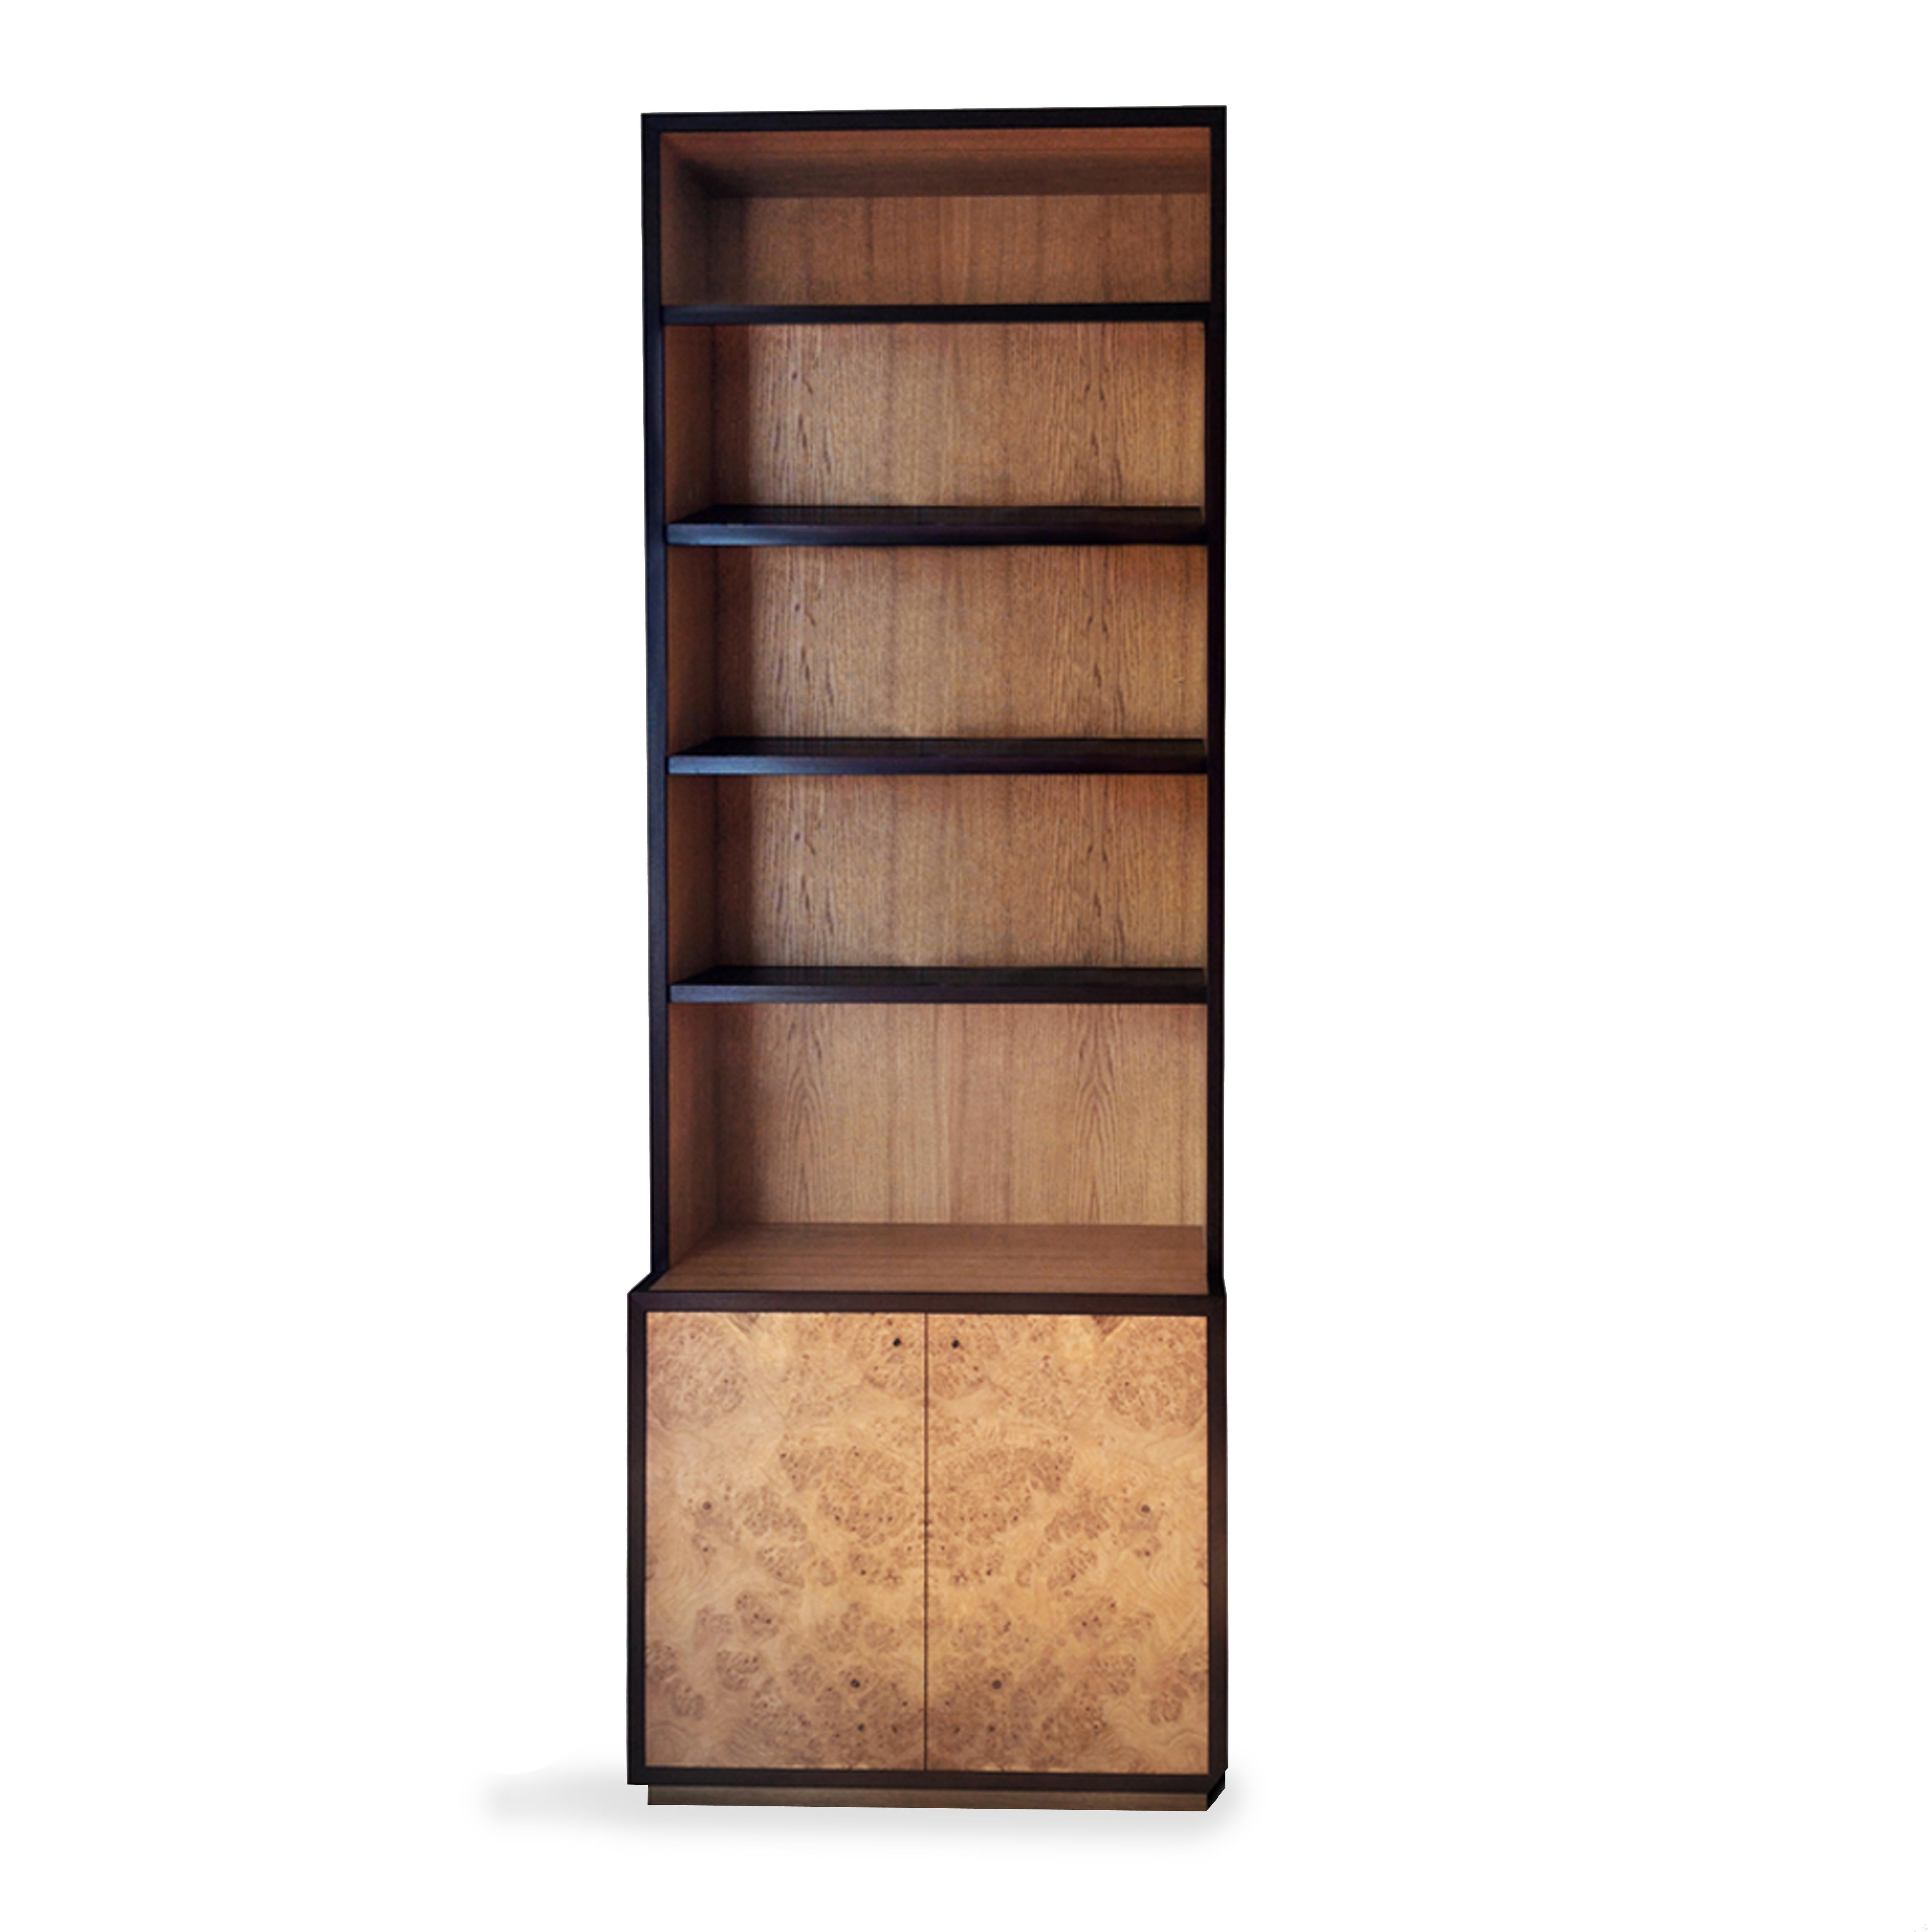 The astonishing combination of veneers gives a sophisticated touch to this elegant bookcase. The natural colour palette and the combination of veneers add a classic touch to a living room or a library, while its innovative thin proportions keep this